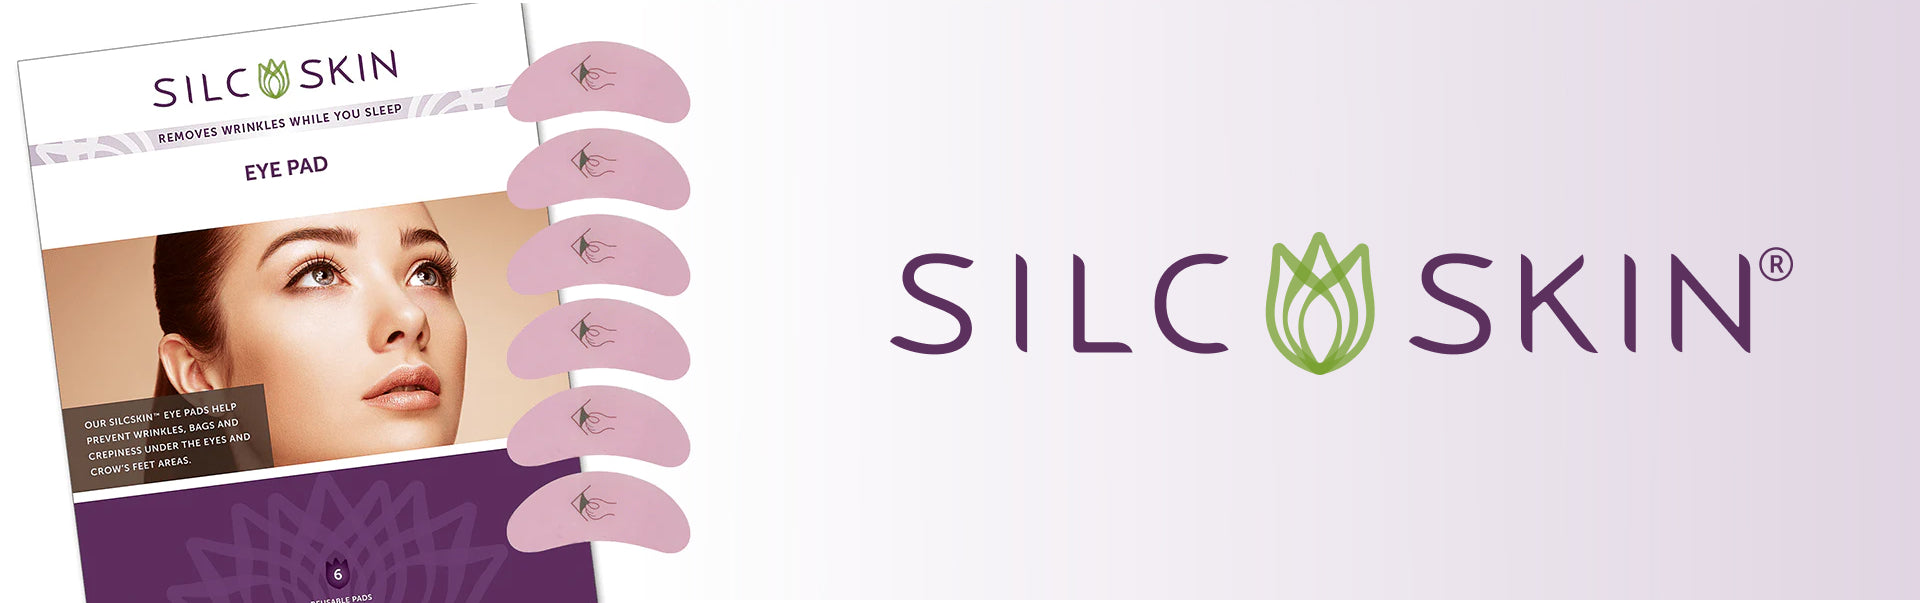 A package of Silcskin Eye Pads next to the Silcskin logo against a gradiant background from white to light purple